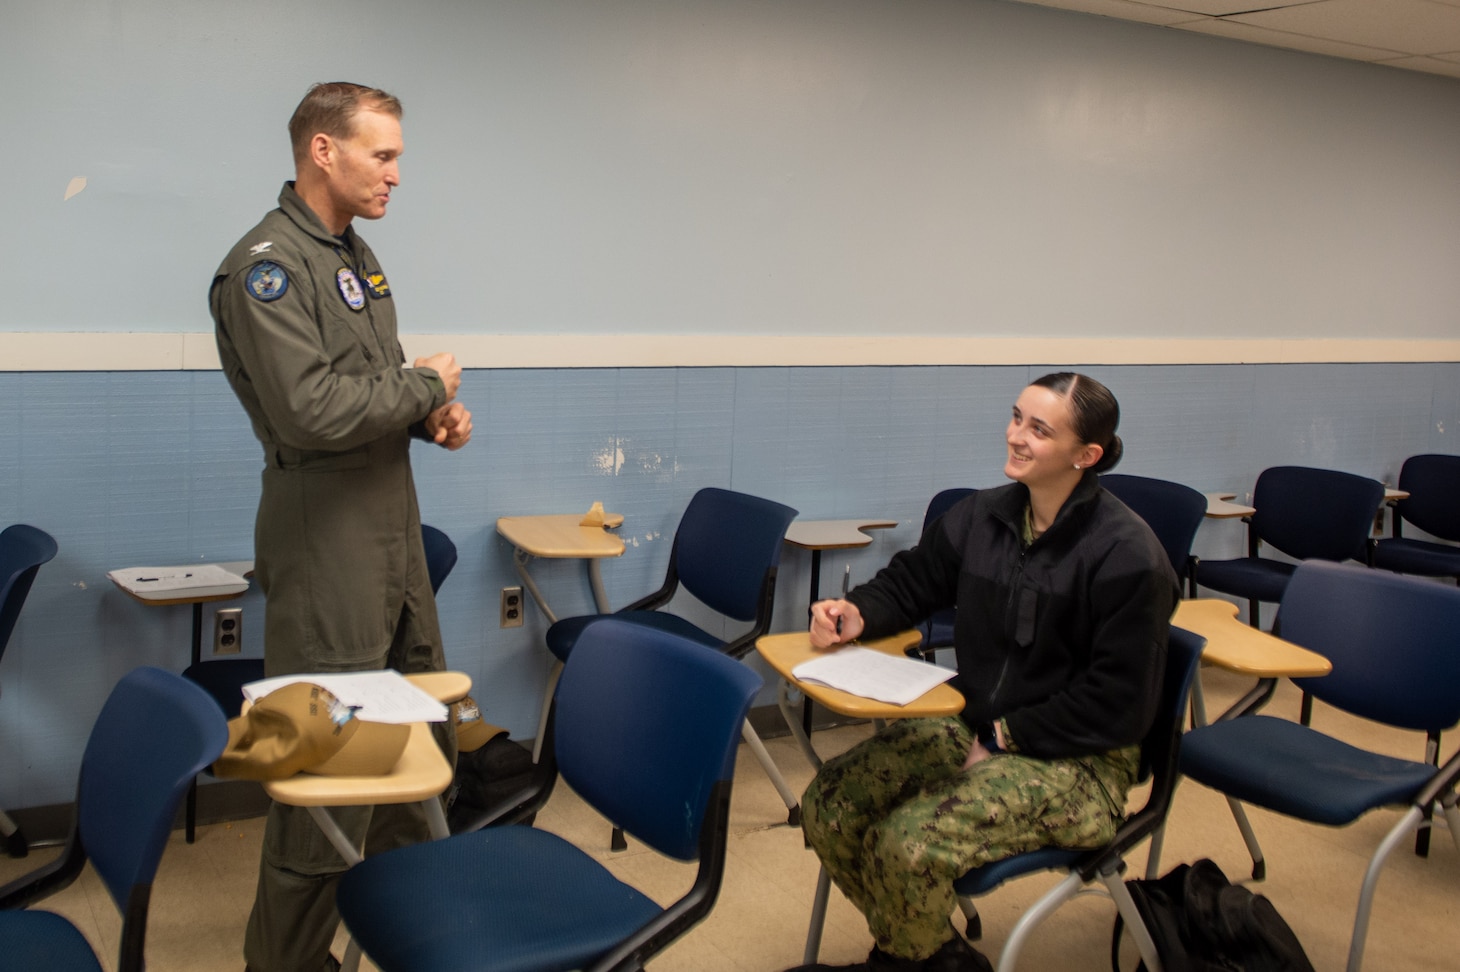 U.S. Navy Capt. Cassidy Norman, commanding officer of the Nimitz-class aircraft carrier USS John C. Stennis (CVN 74), interacts with Aviation Boatswain’s Mate (Equipment) Airman Titatianna Bennett, from Sarasota, Florida, during a School of Ship a visit at Huntington Hall, Hampton Virginia, Feb. 14, 2023. The John C. Stennis is in Newport News Shipyard conducting Refueling and Complex Overhaul to prepare the ship for the second half of its 50-year service life.